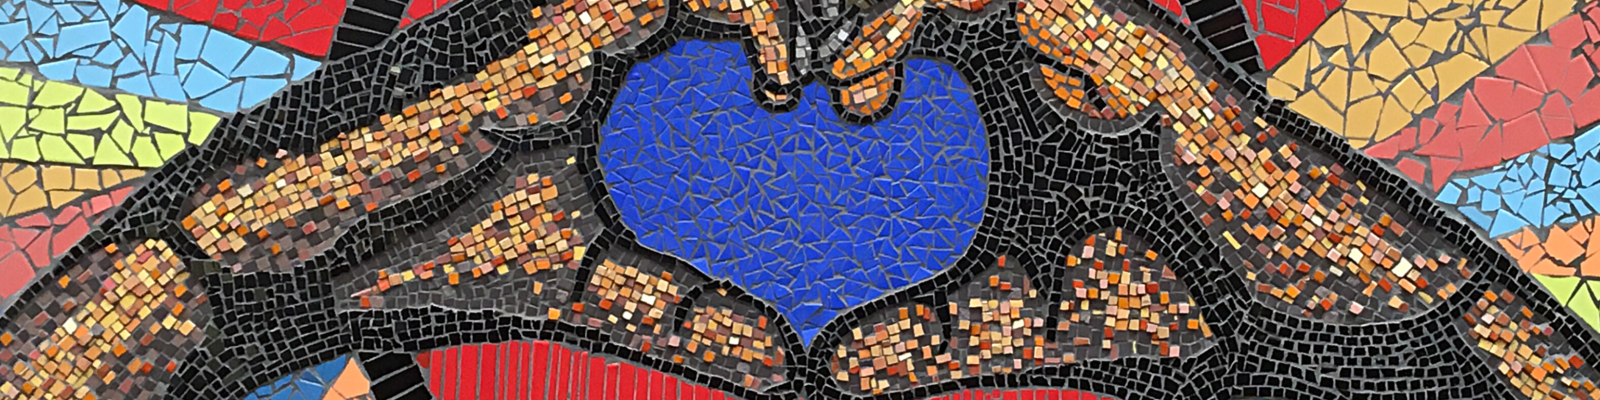 Close-up of a mosaic depicting hands formed into a heart shape.